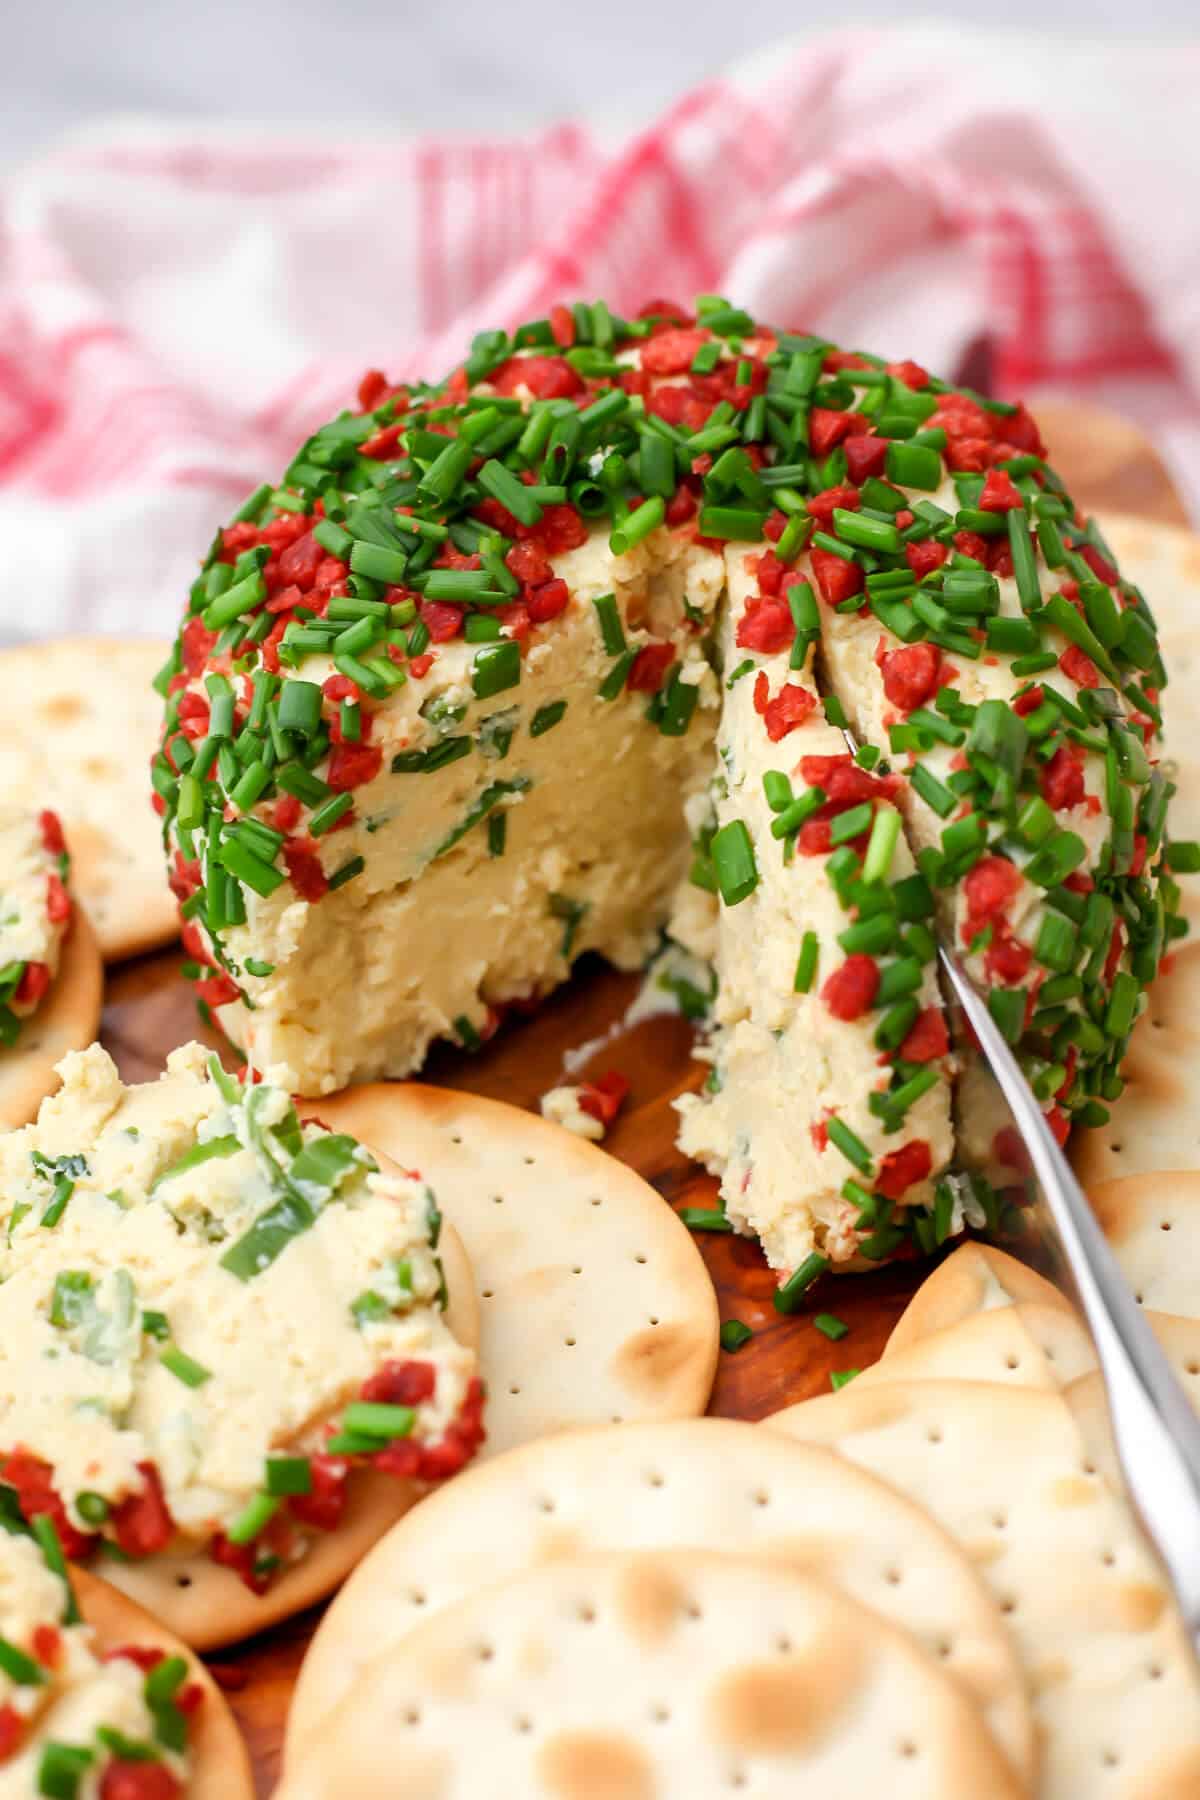 A vegan cheese ball coated in chopped chives and vegan bacon bits with crackers around it.